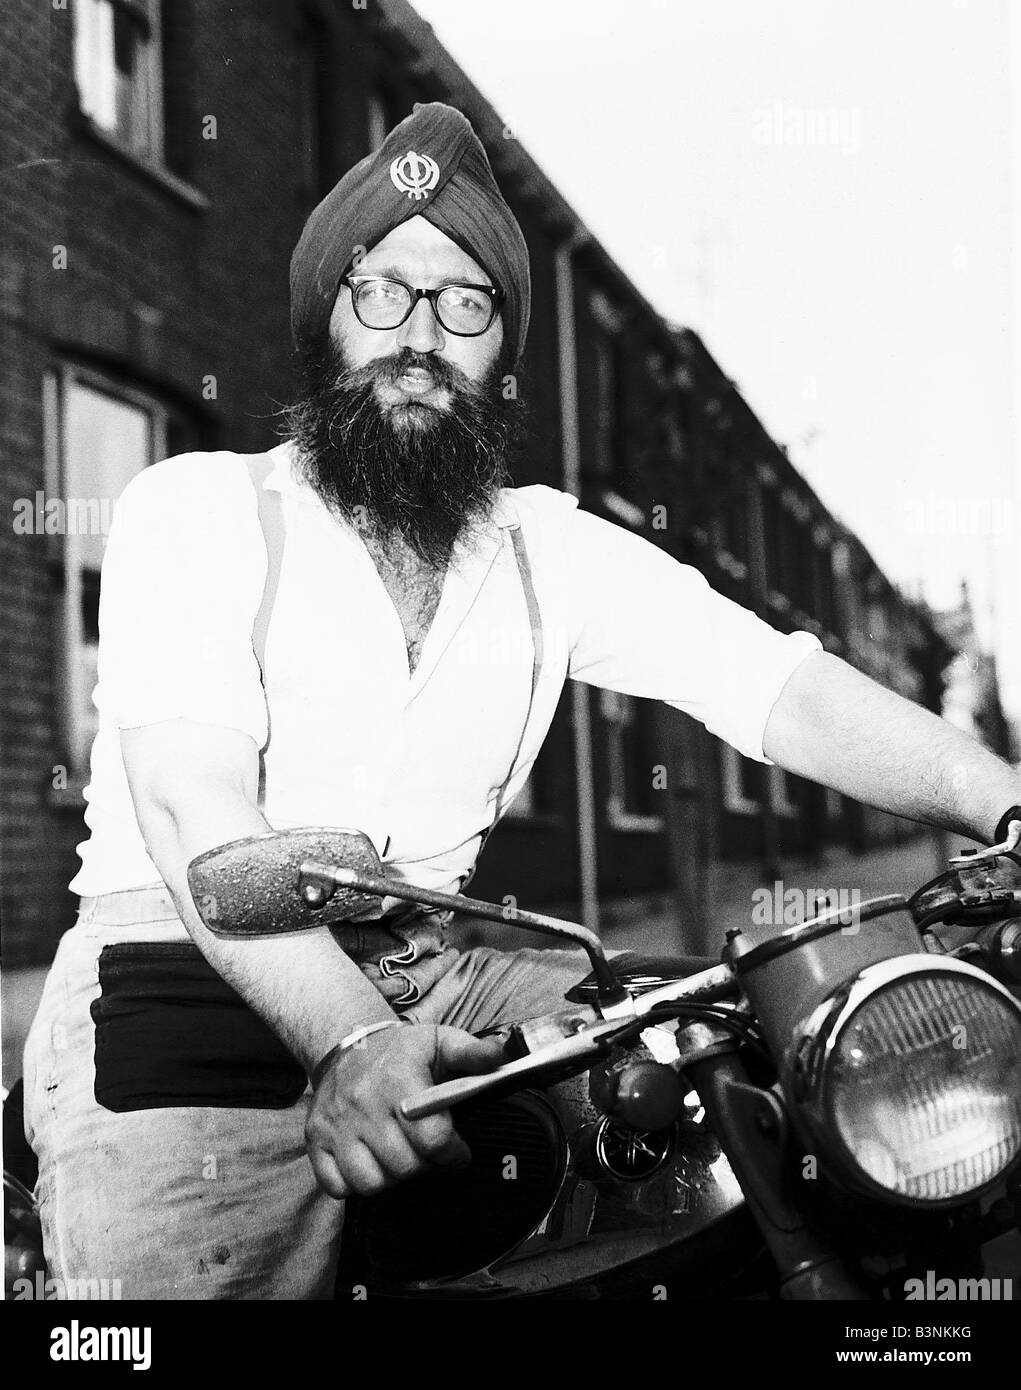 Hans Powles was arrested again for not wearing a motorcycle helmet when riding his bike after it was made law He was fined 1 each time he was not wearing one at court his Sikh name is Mohan Hartung Singh Stock Photo